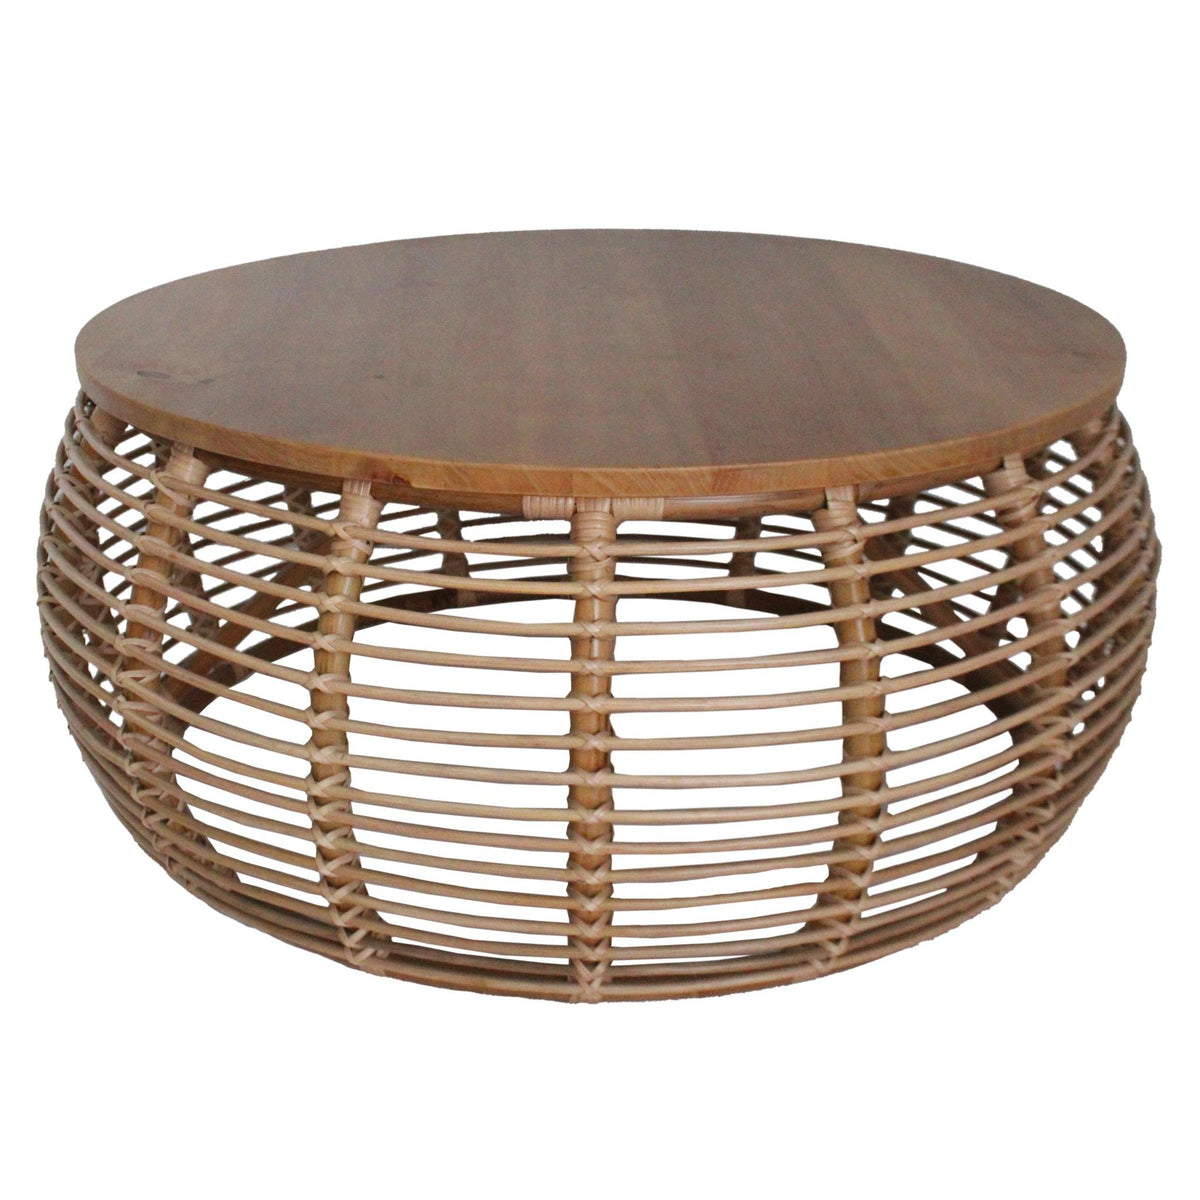 Iris Rattan Round Coffee Table by New Pacific Direct - 4900018